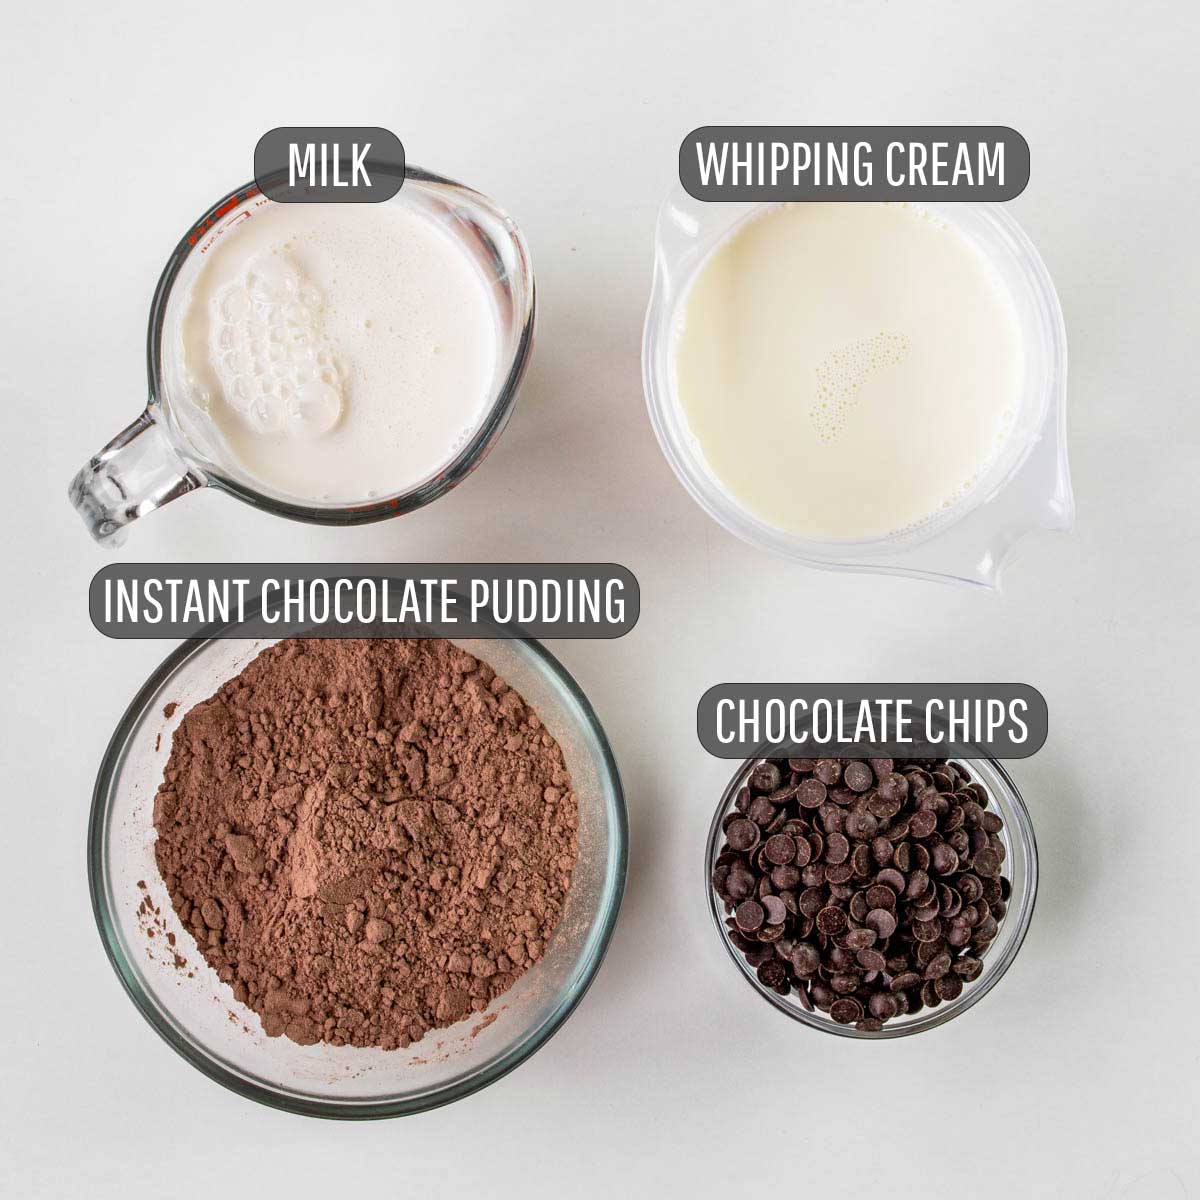 ingredients needed to make chocolate pudding.